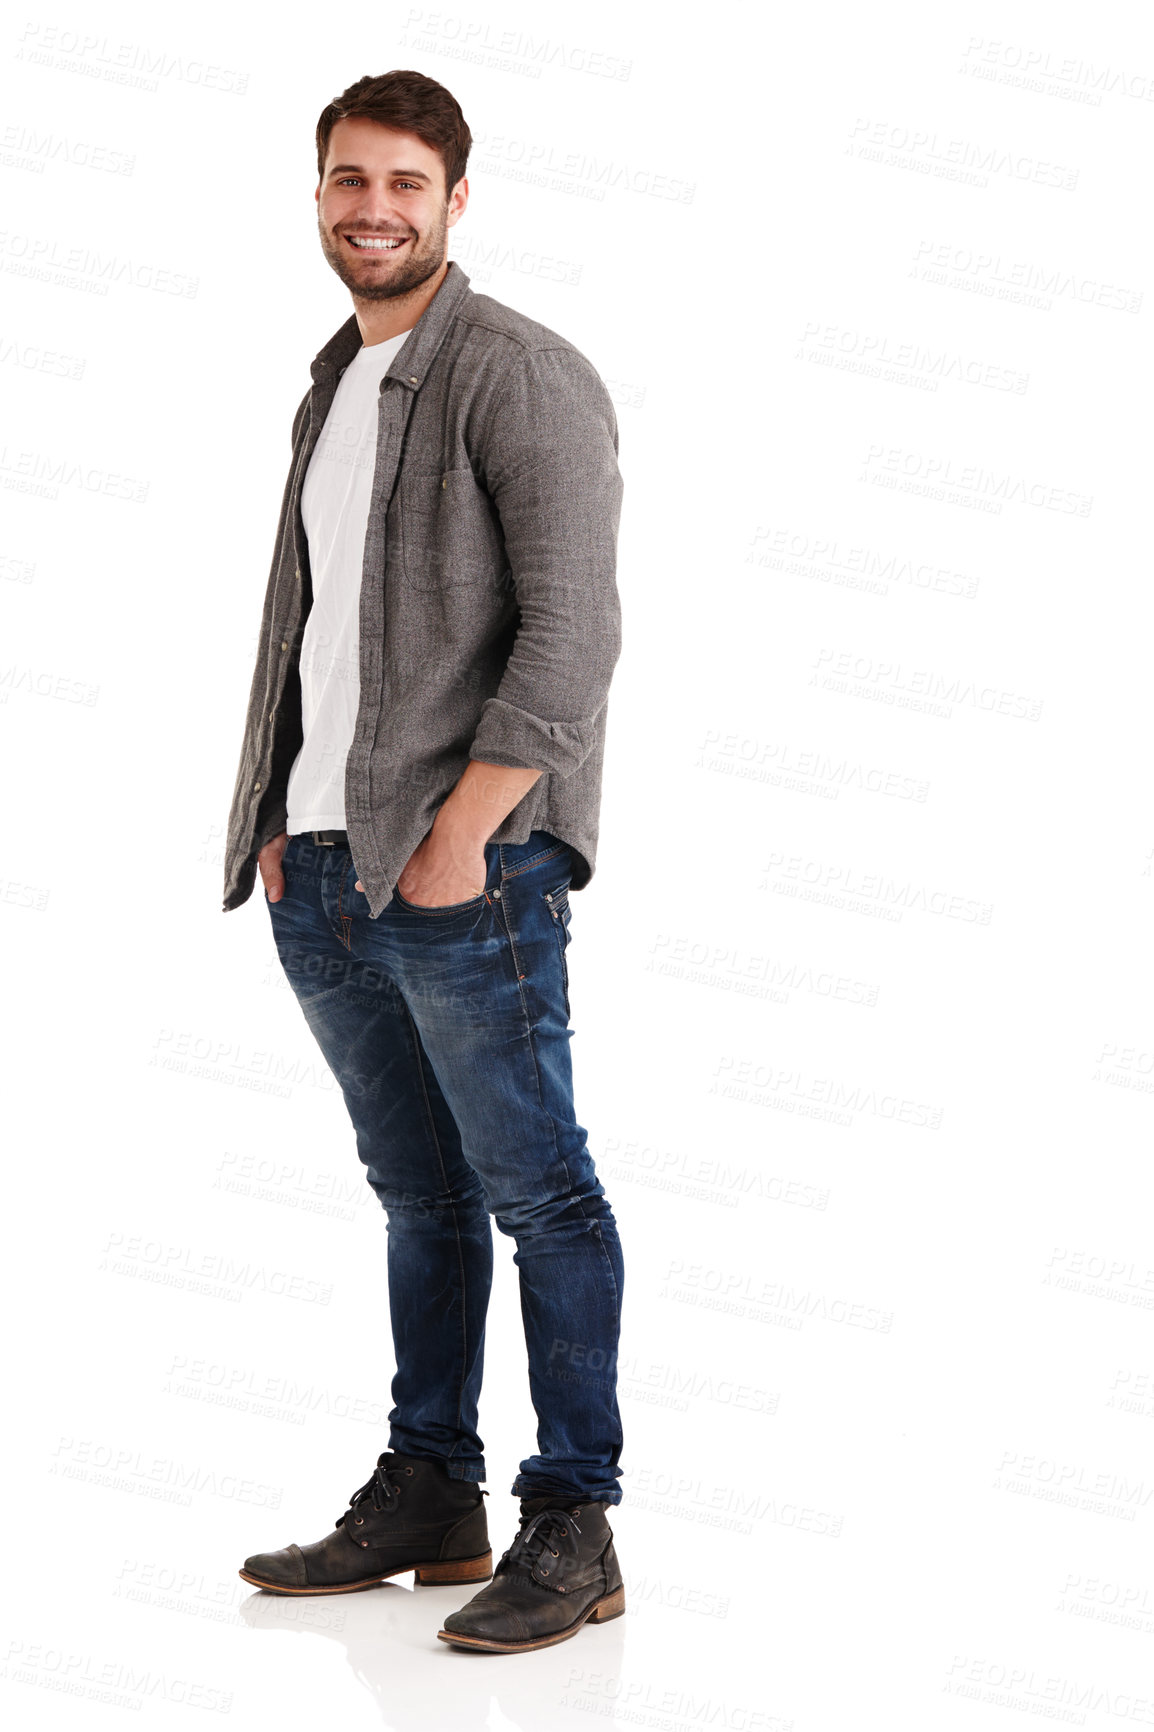 Buy stock photo Full length studio shot of a smiling young man standing with his hands in his pockets